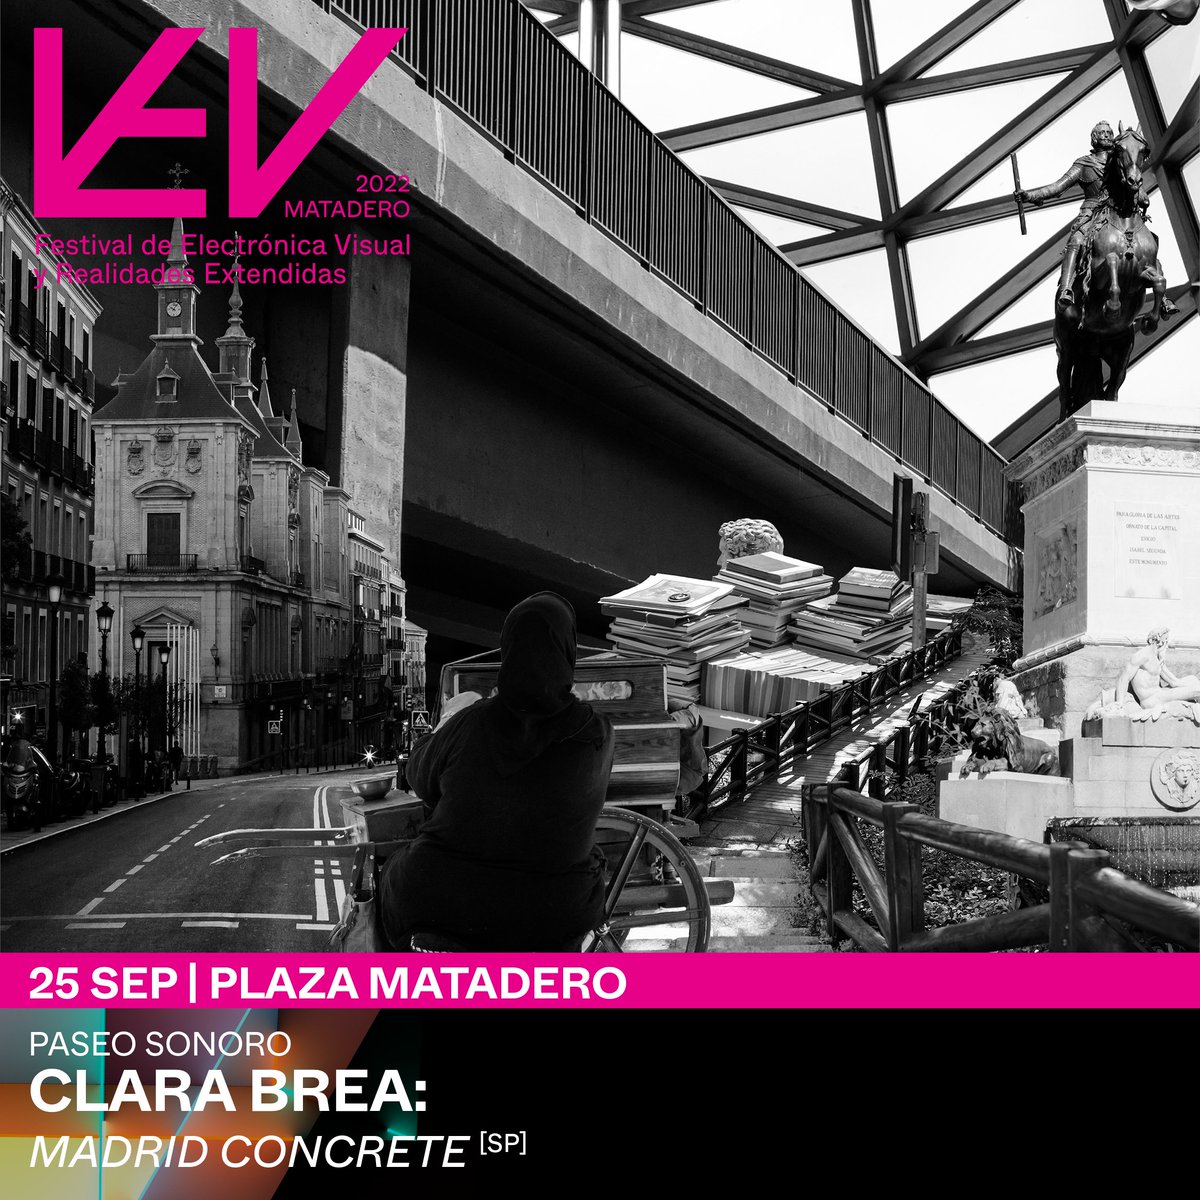 In #LEVMatadero we will be listening for the first time to #MadridConcrete by @clara_brea, a project in which the artist re-imagines the soundscape of the city through field recordings captured during her stay at #ResidenciasMatadero. 25 SEP 12PM @mataderomadrid ✶ Free access